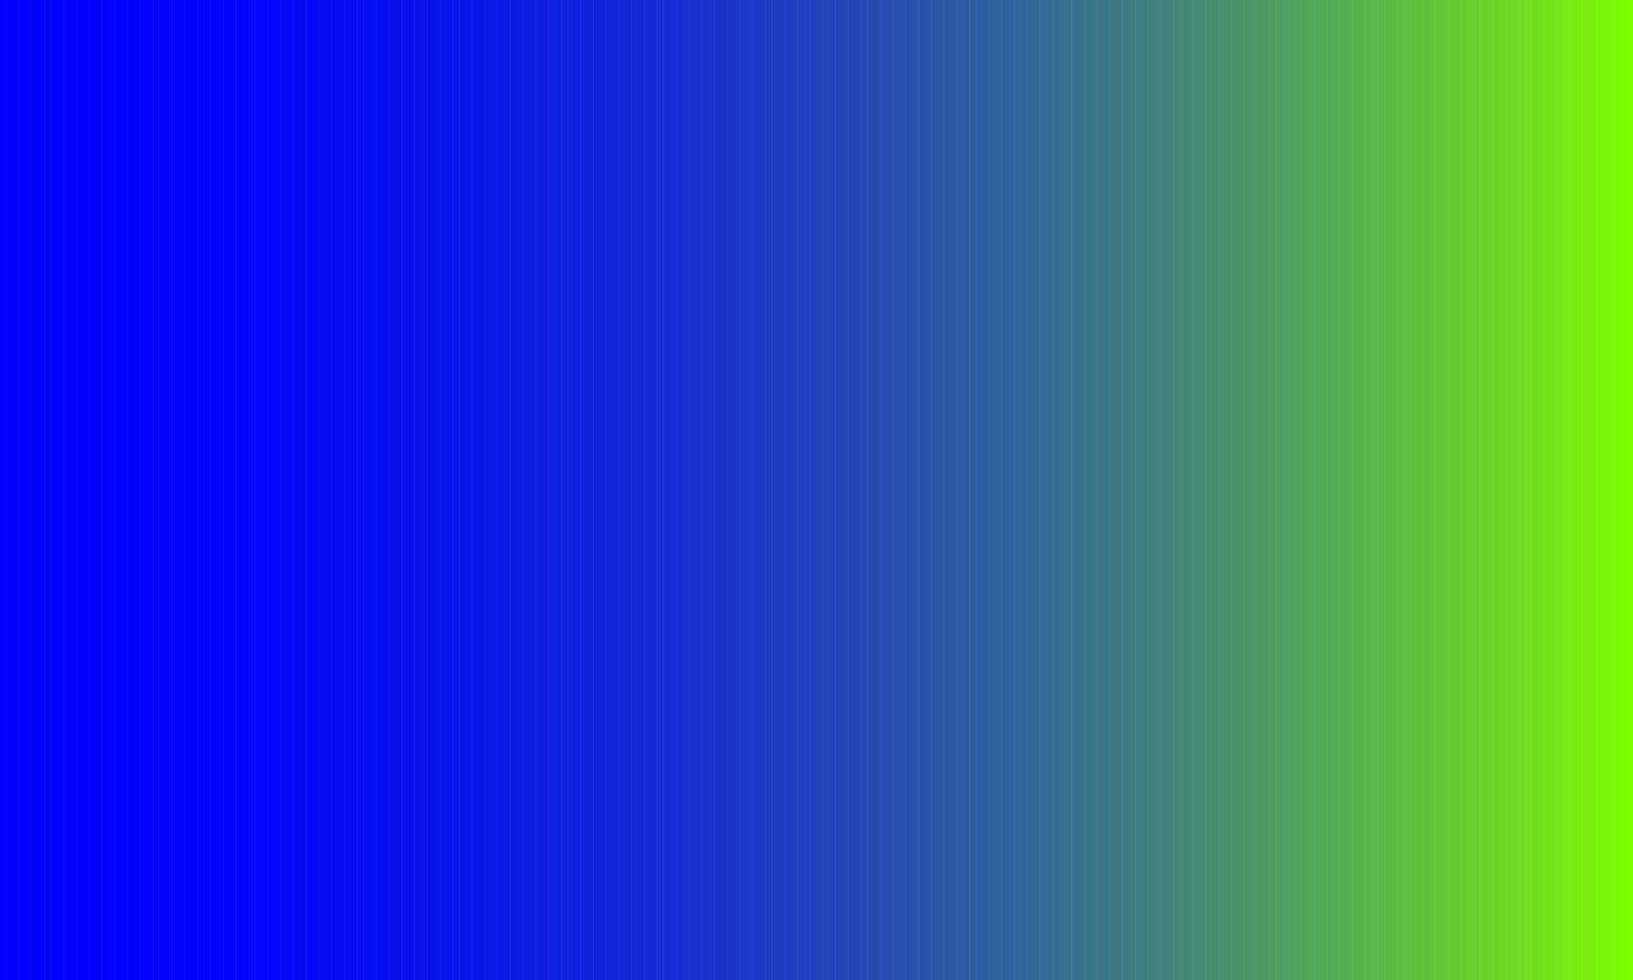 gradient blue and pastel green. abstract, simple, cheerful and clean style. suitable for copy space, wallpaper, background, texture, poster, banner, flyer or decor vector